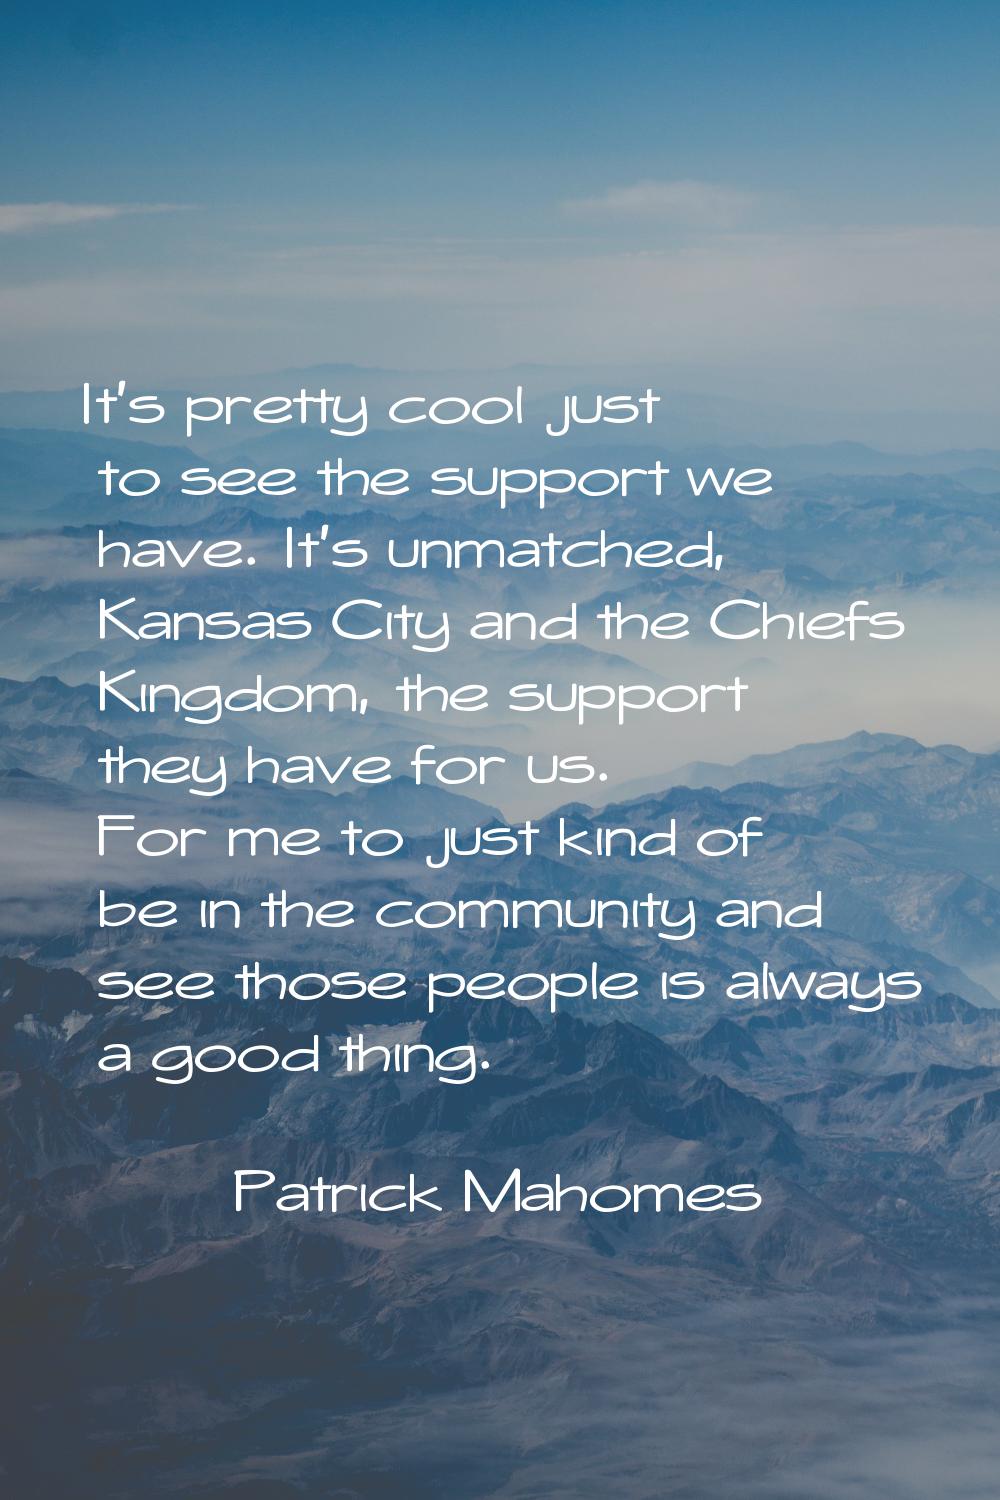 It's pretty cool just to see the support we have. It's unmatched, Kansas City and the Chiefs Kingdo